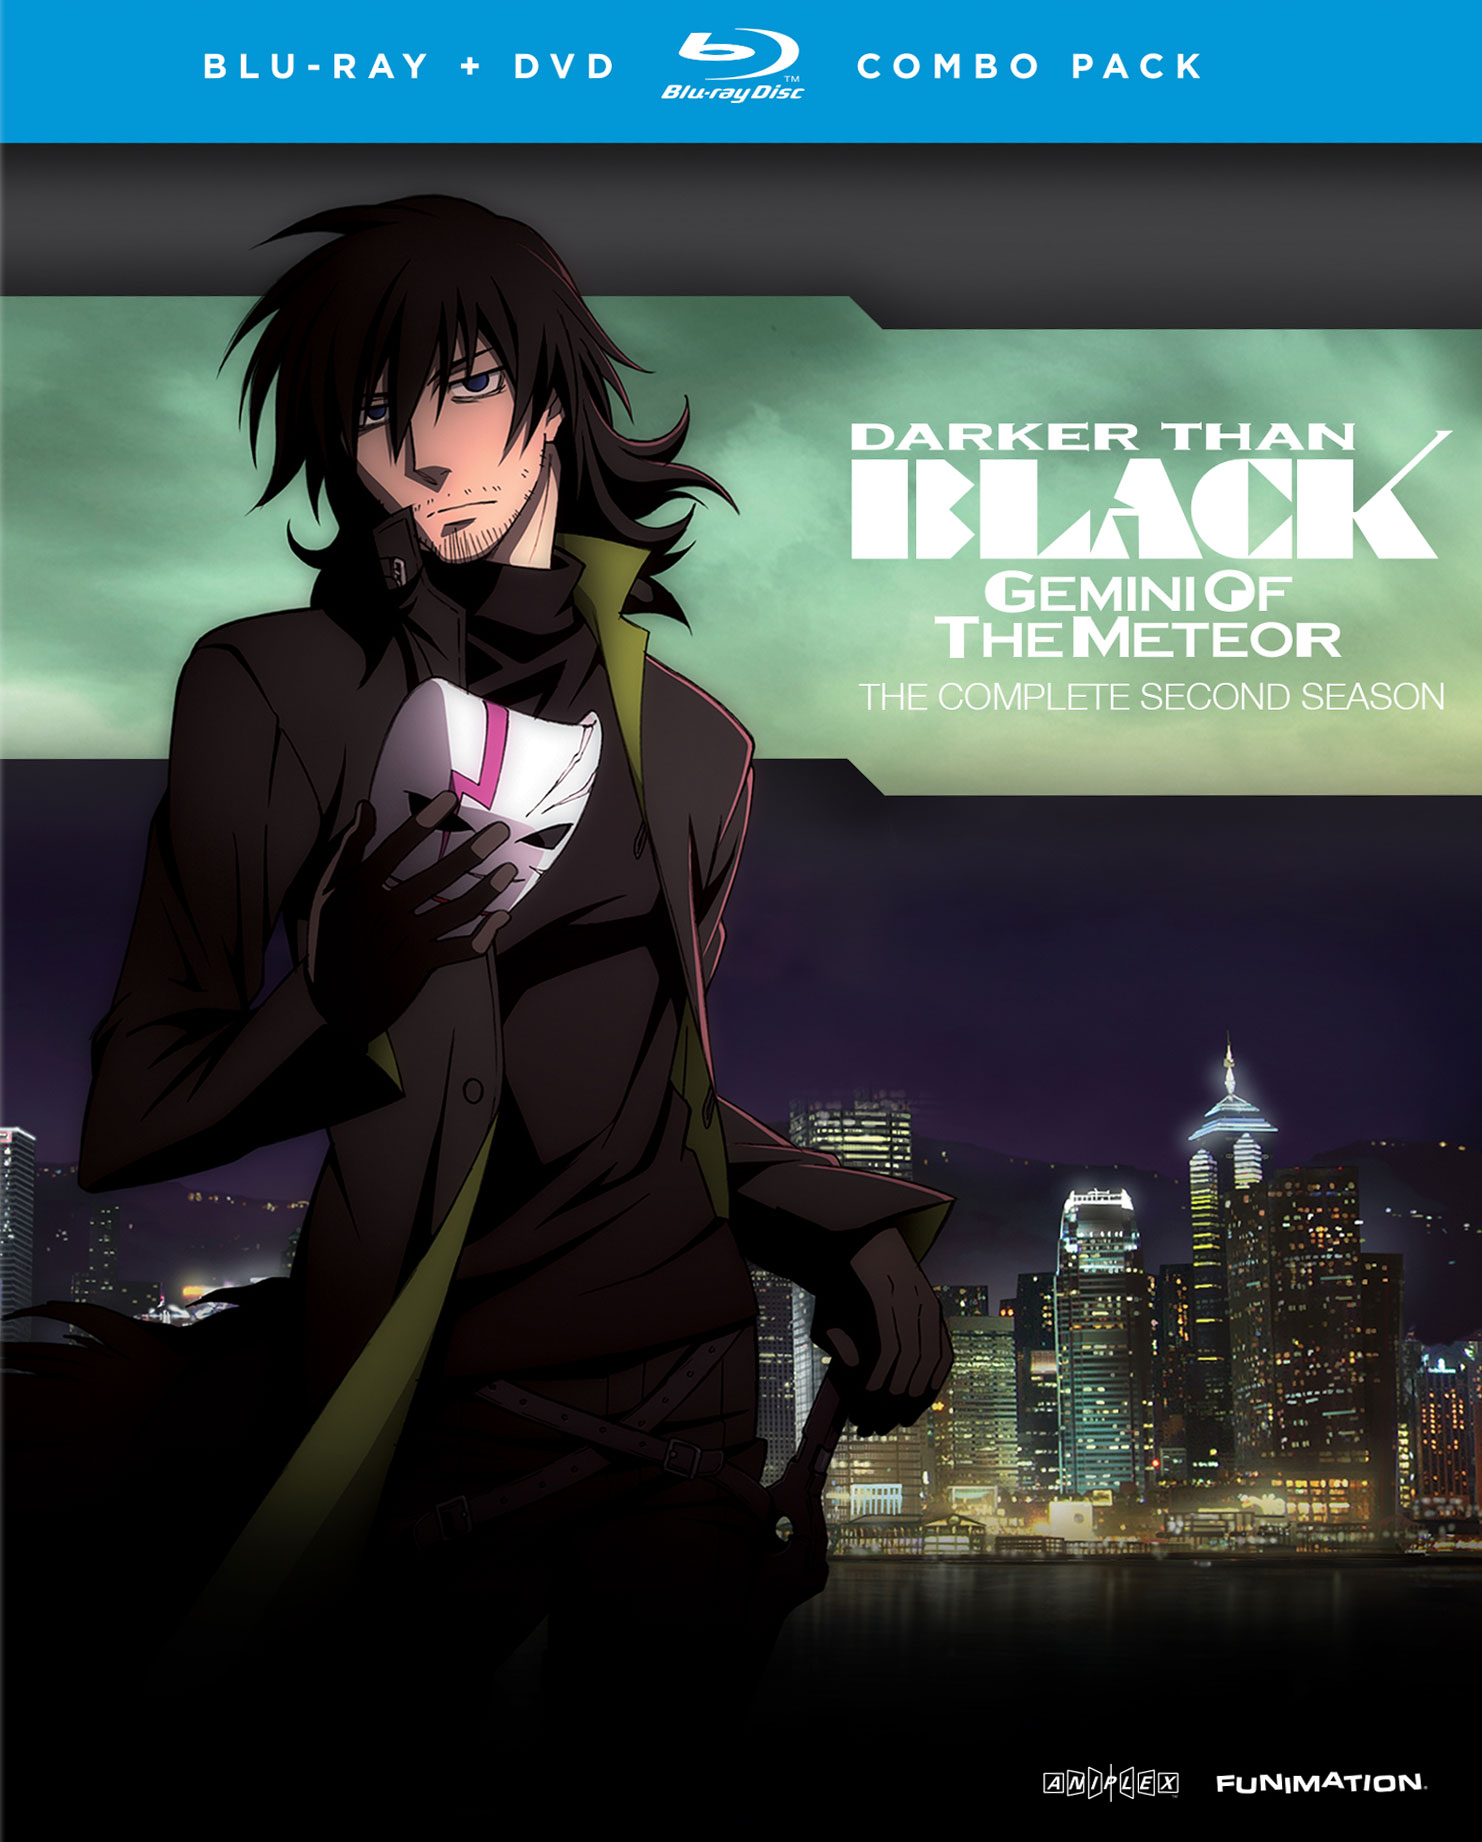 The History of Darker than Black